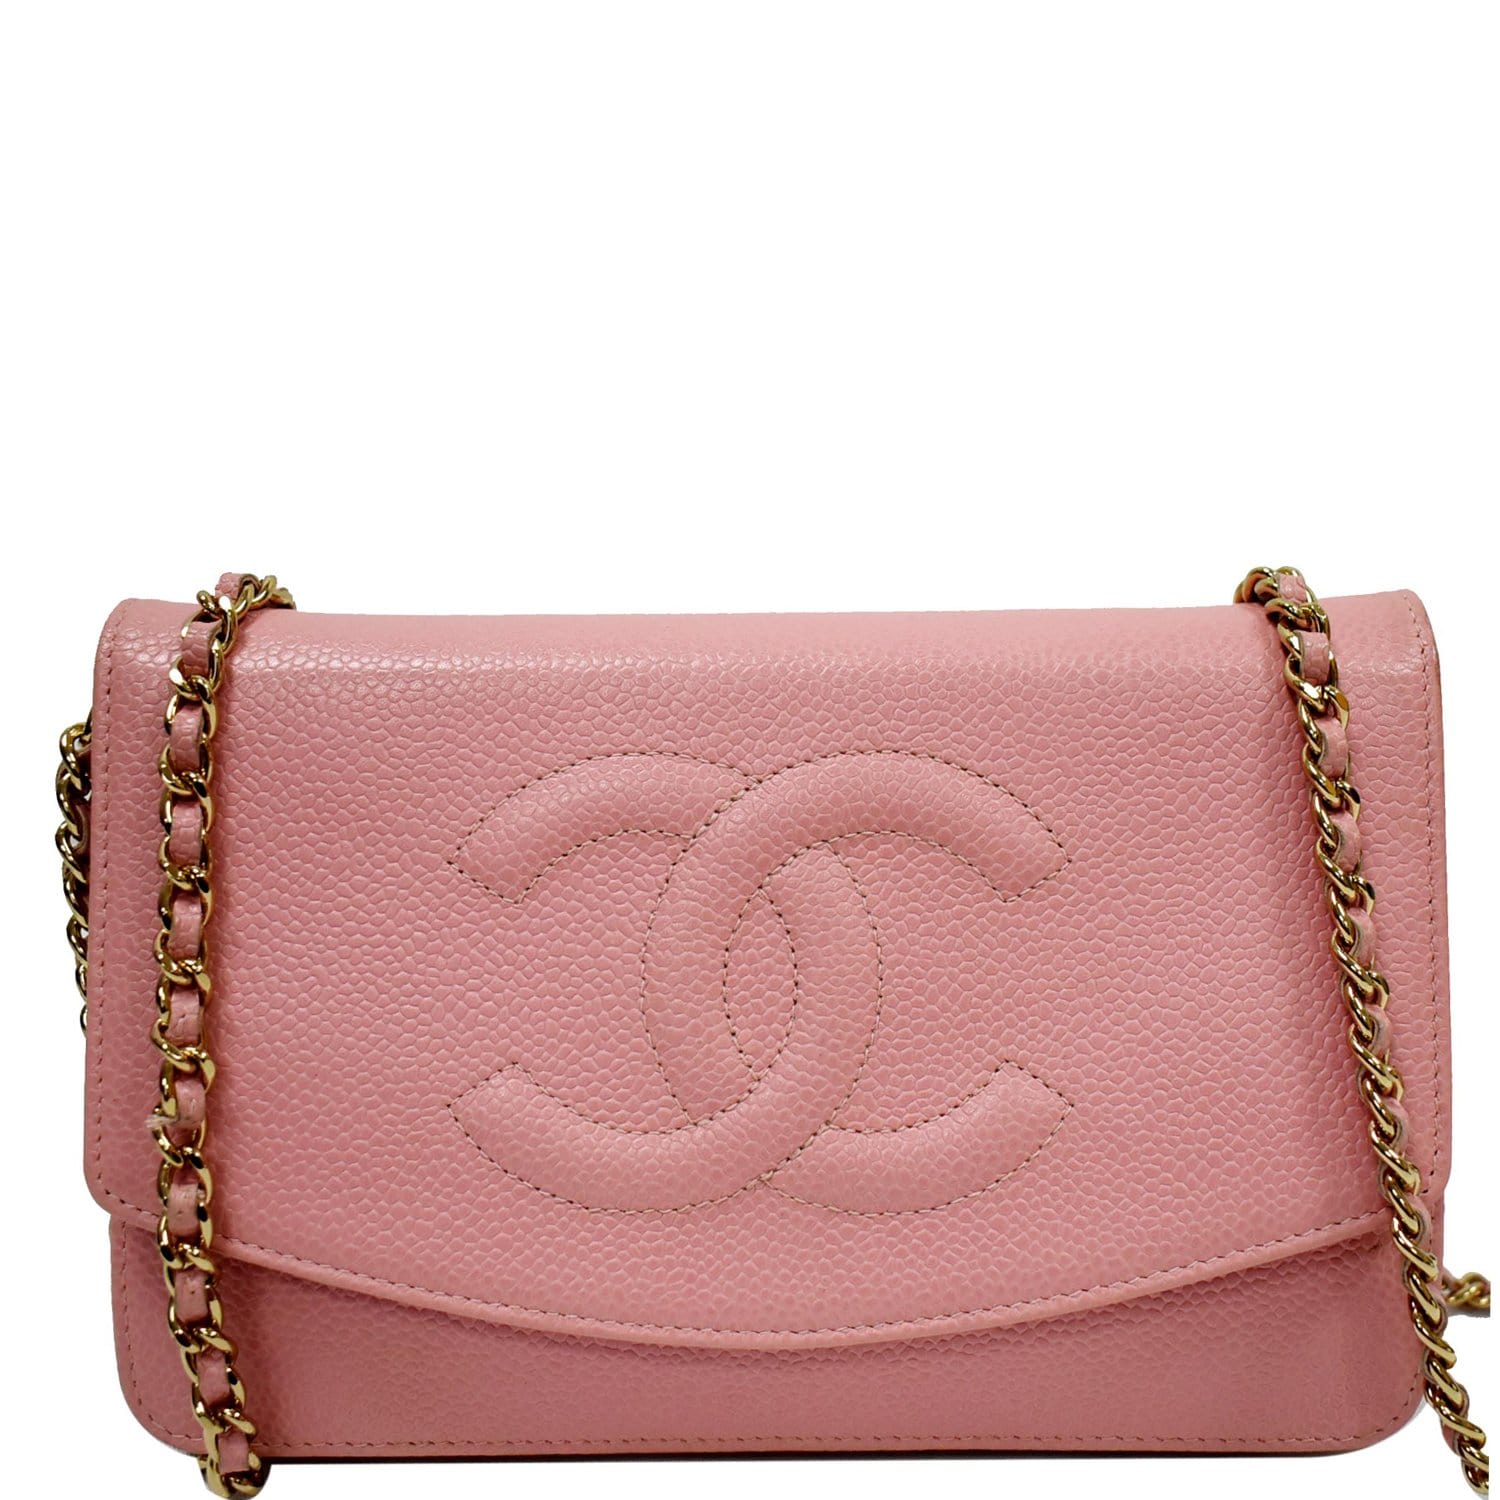 Chanel Wallet On Chain Timeless/Classique leather crossbody bag - ShopStyle